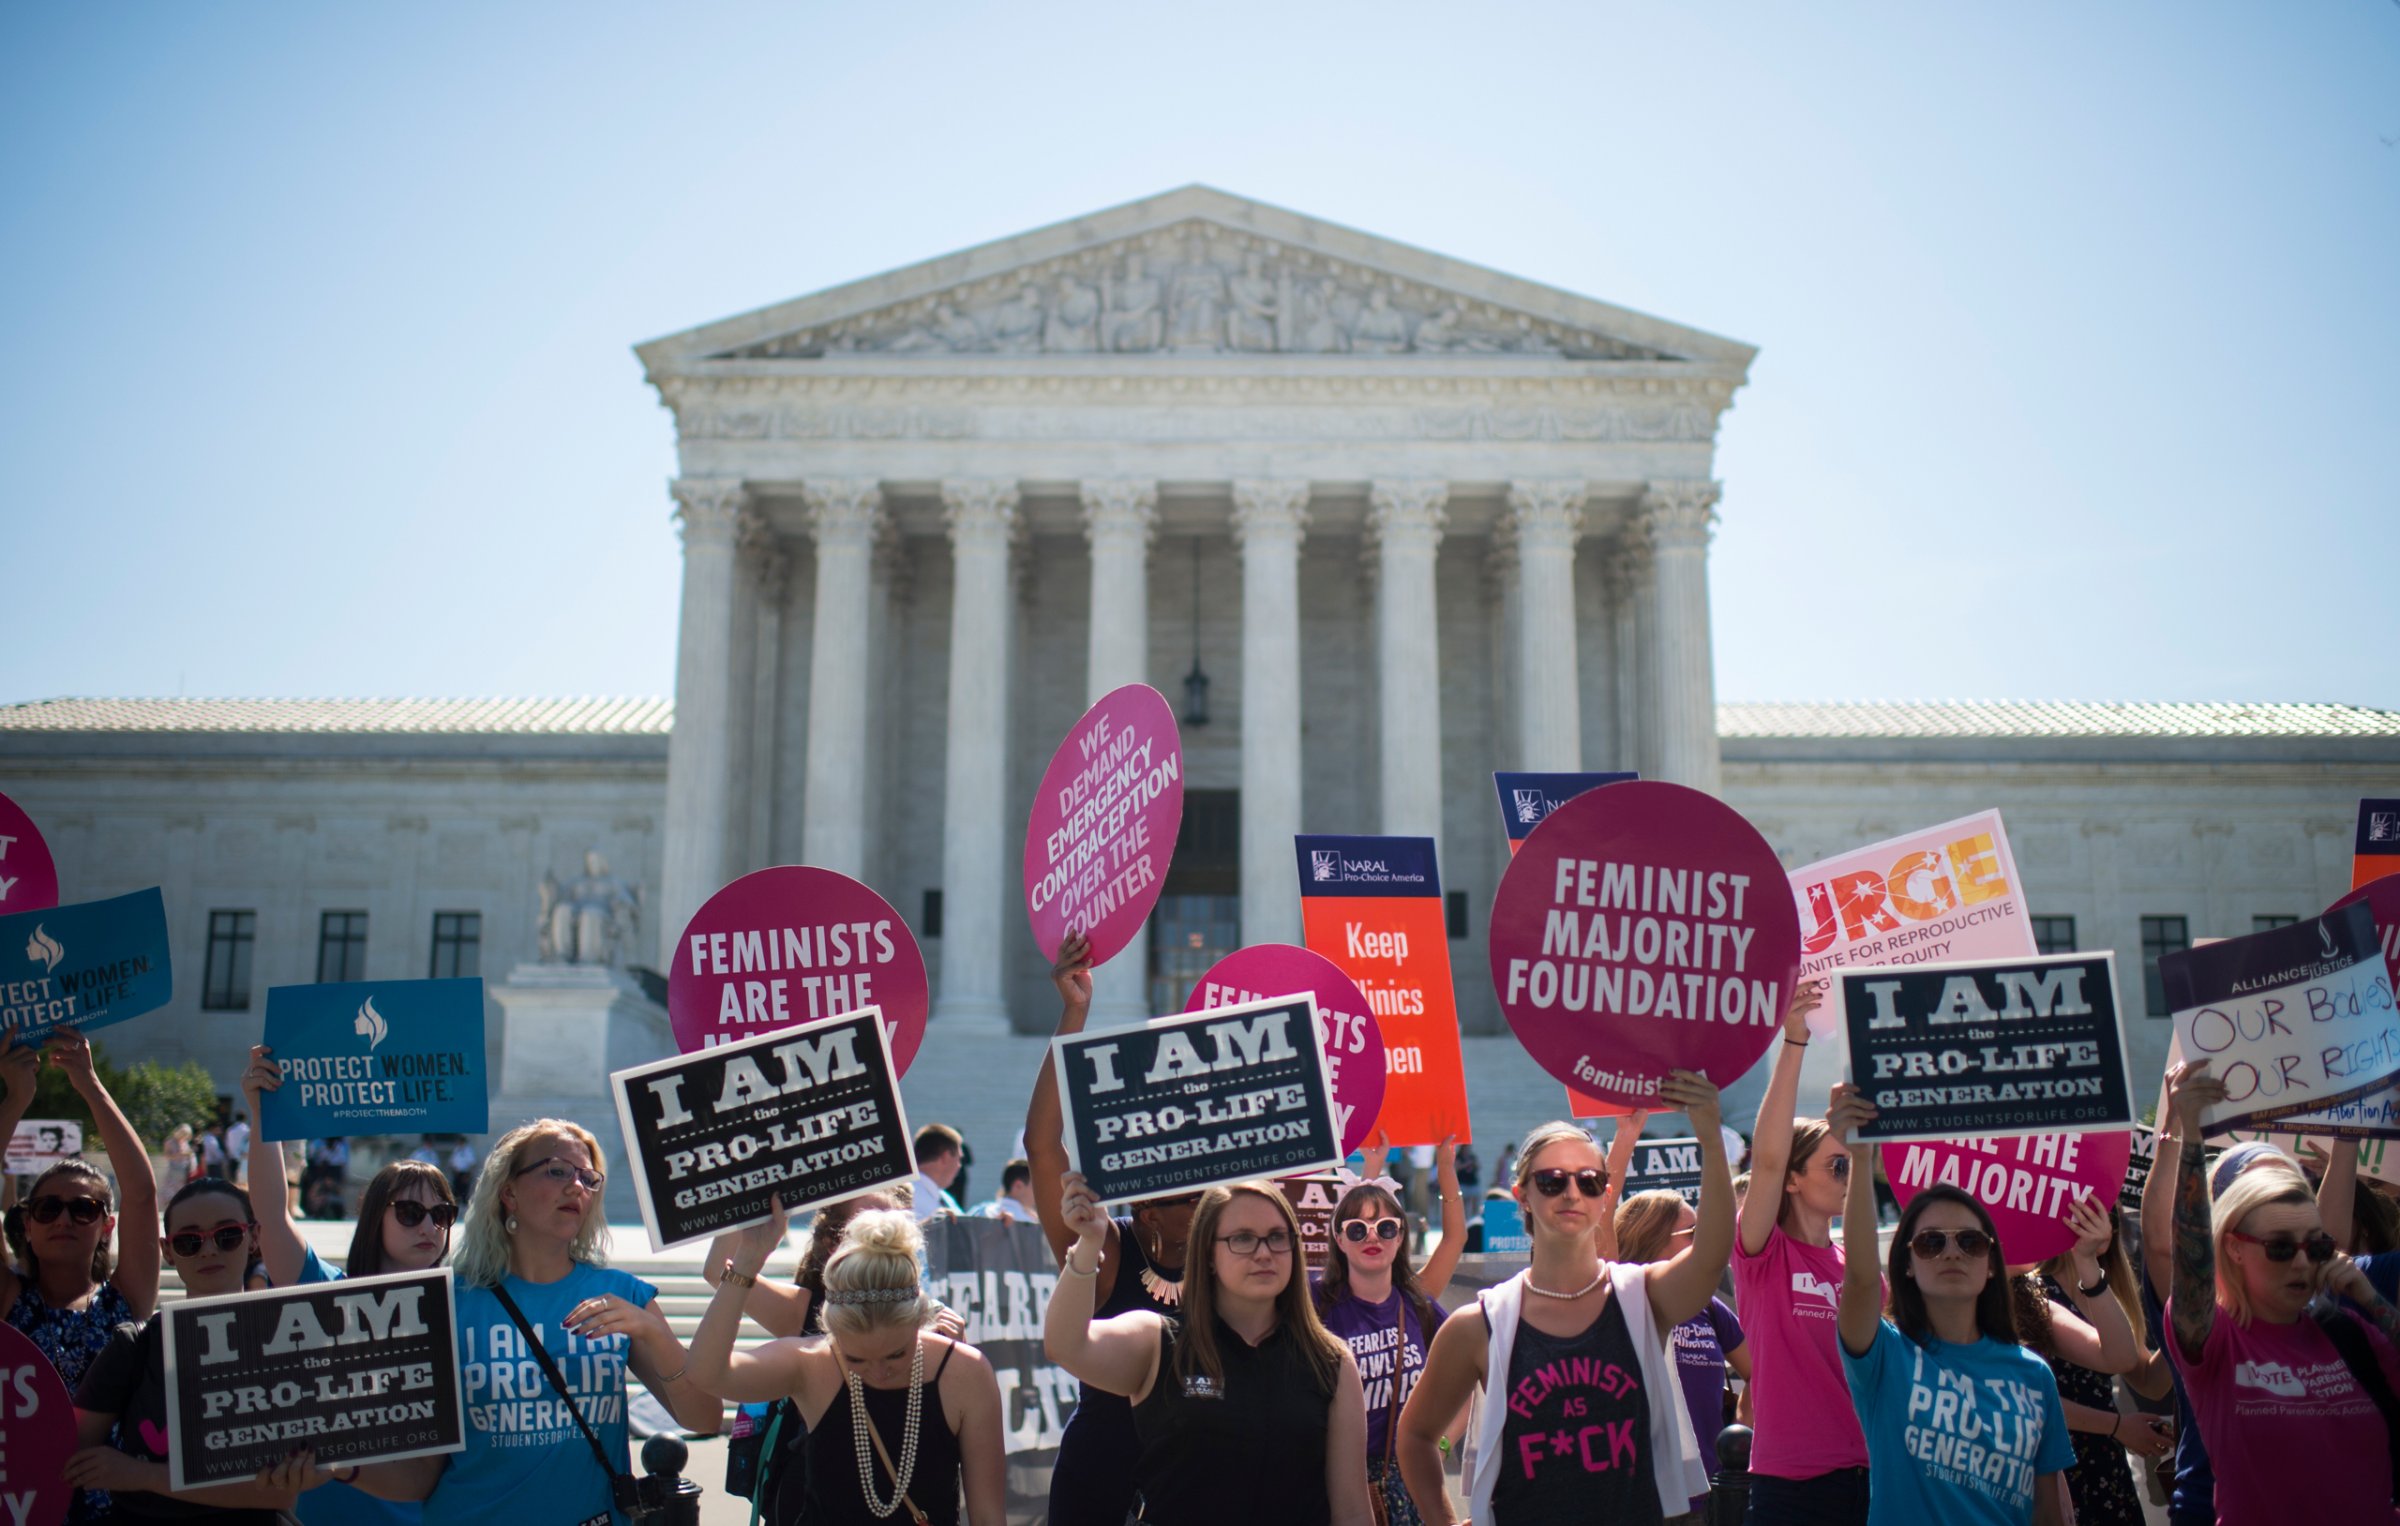 Pro-choice and pro-life demonstrators rally outside of the U.S. Supreme Court on Monday morning, June 20, 2016. The court is expected to hand down their decision on a Texas law which requires clinics to meet the same standards as ambulatory surgical centers and forces doctors to have admitting privileges at nearby hospitals. (Photo By Bill Clark/CQ Roll Call) (CQ Roll Call via AP Images)